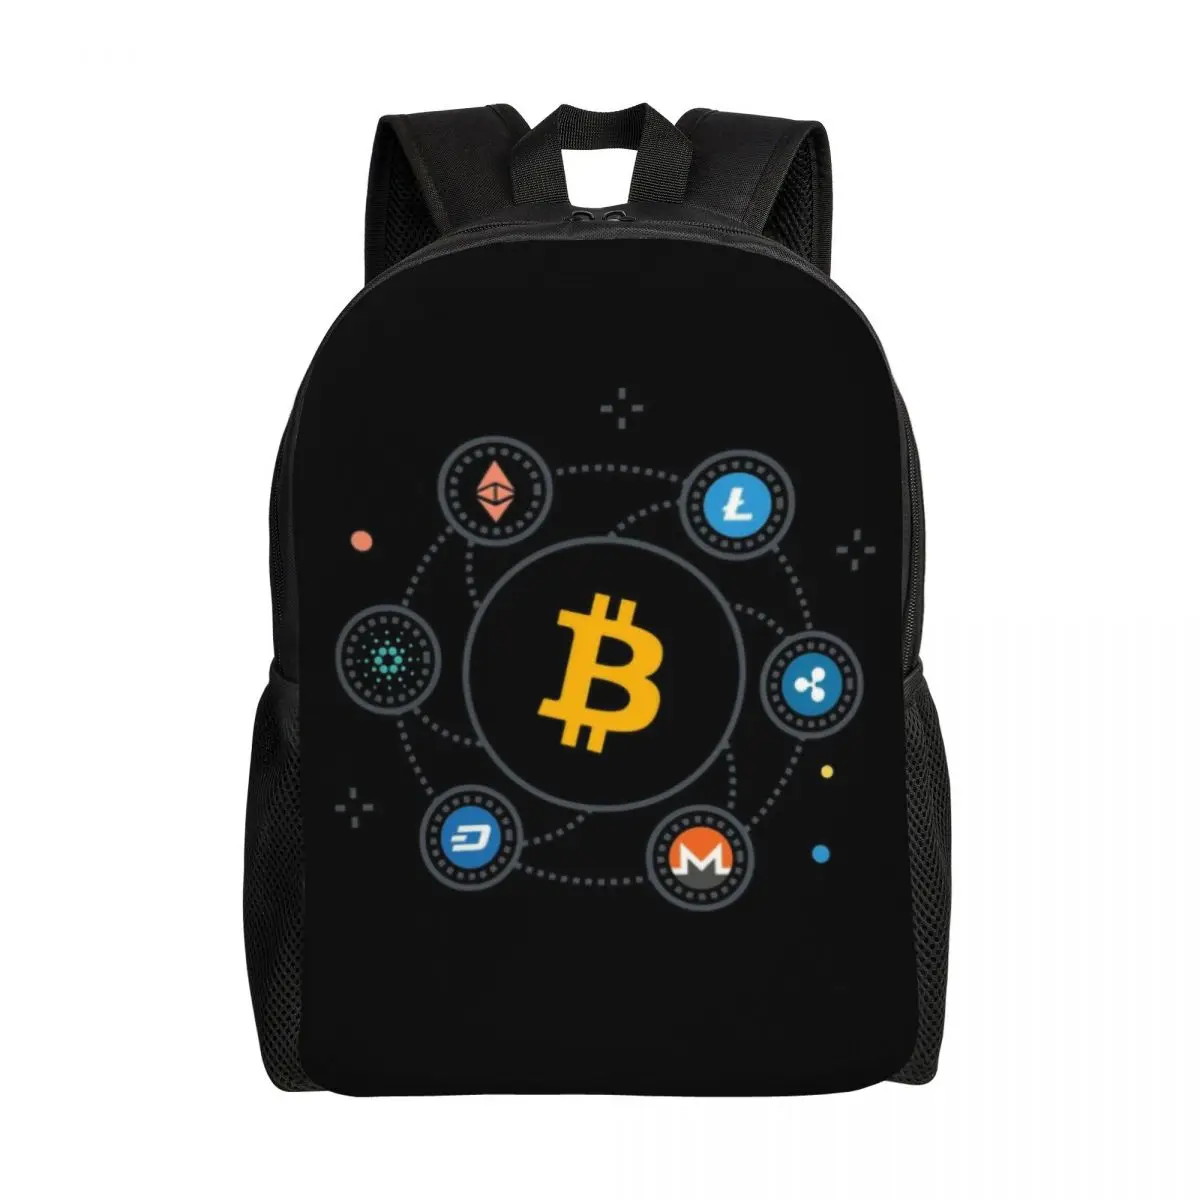 

Personalized Crypto Bitcoin Backpacks Men Women Fashion Bookbag for School College BTC Cryptocurrency Blockchain Geek Bags